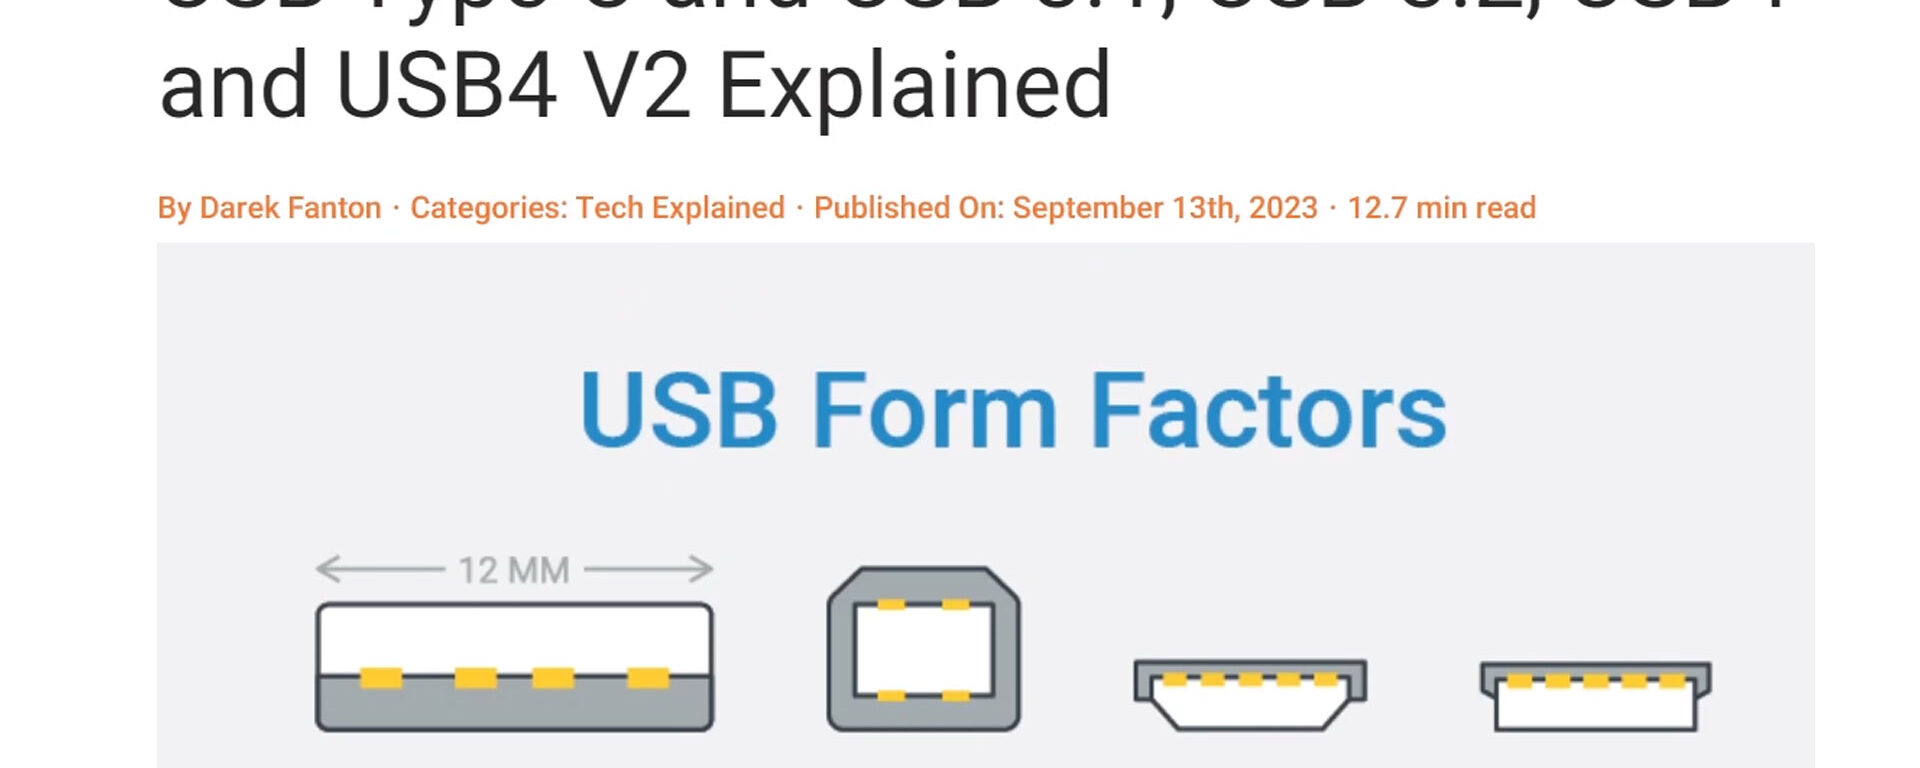 Recommended Reading: USB Explained